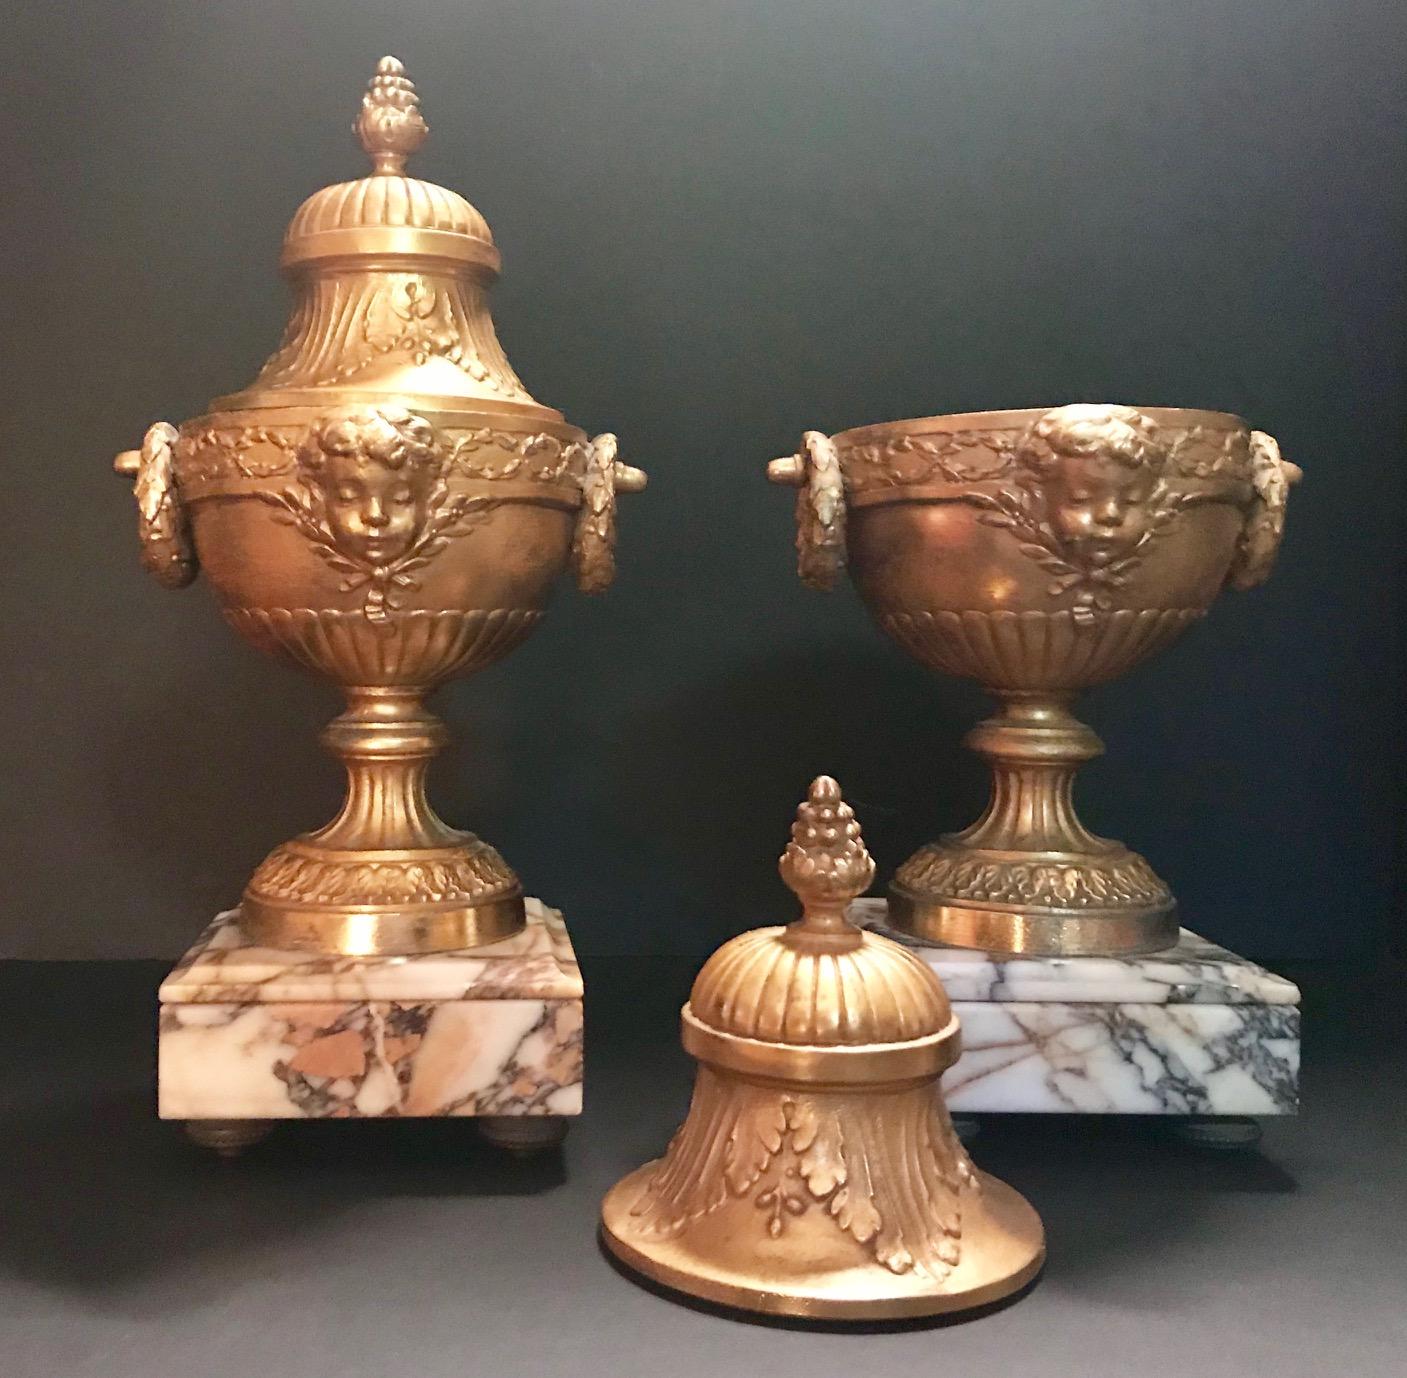 19th Century Pair of French Louis XVI Style Gilt Bronze lidded Urns  1